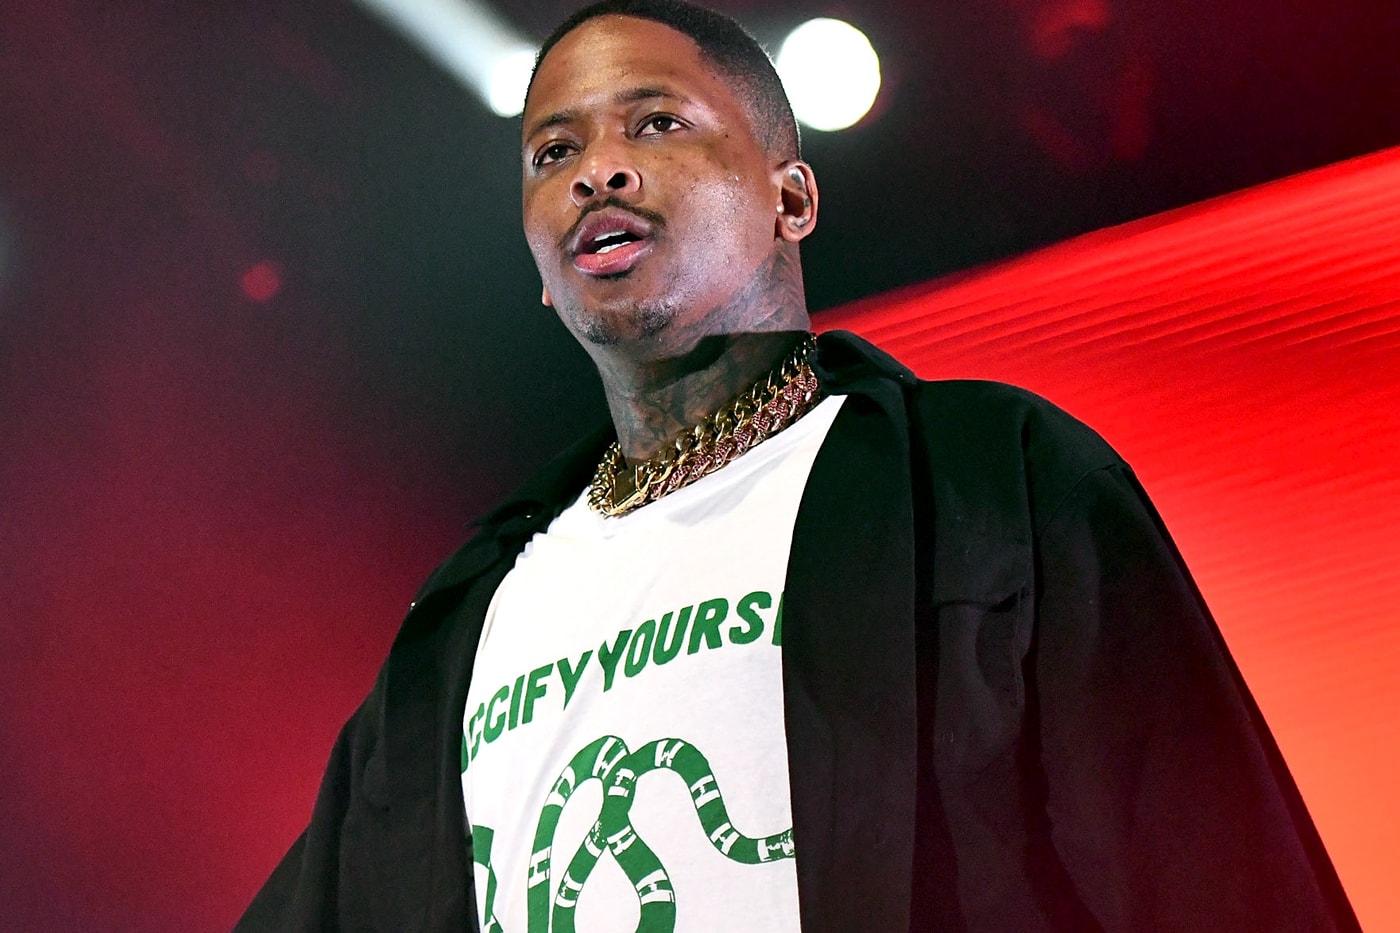 yg calls out american airlines racist flight tmz twitter drunk intoxication